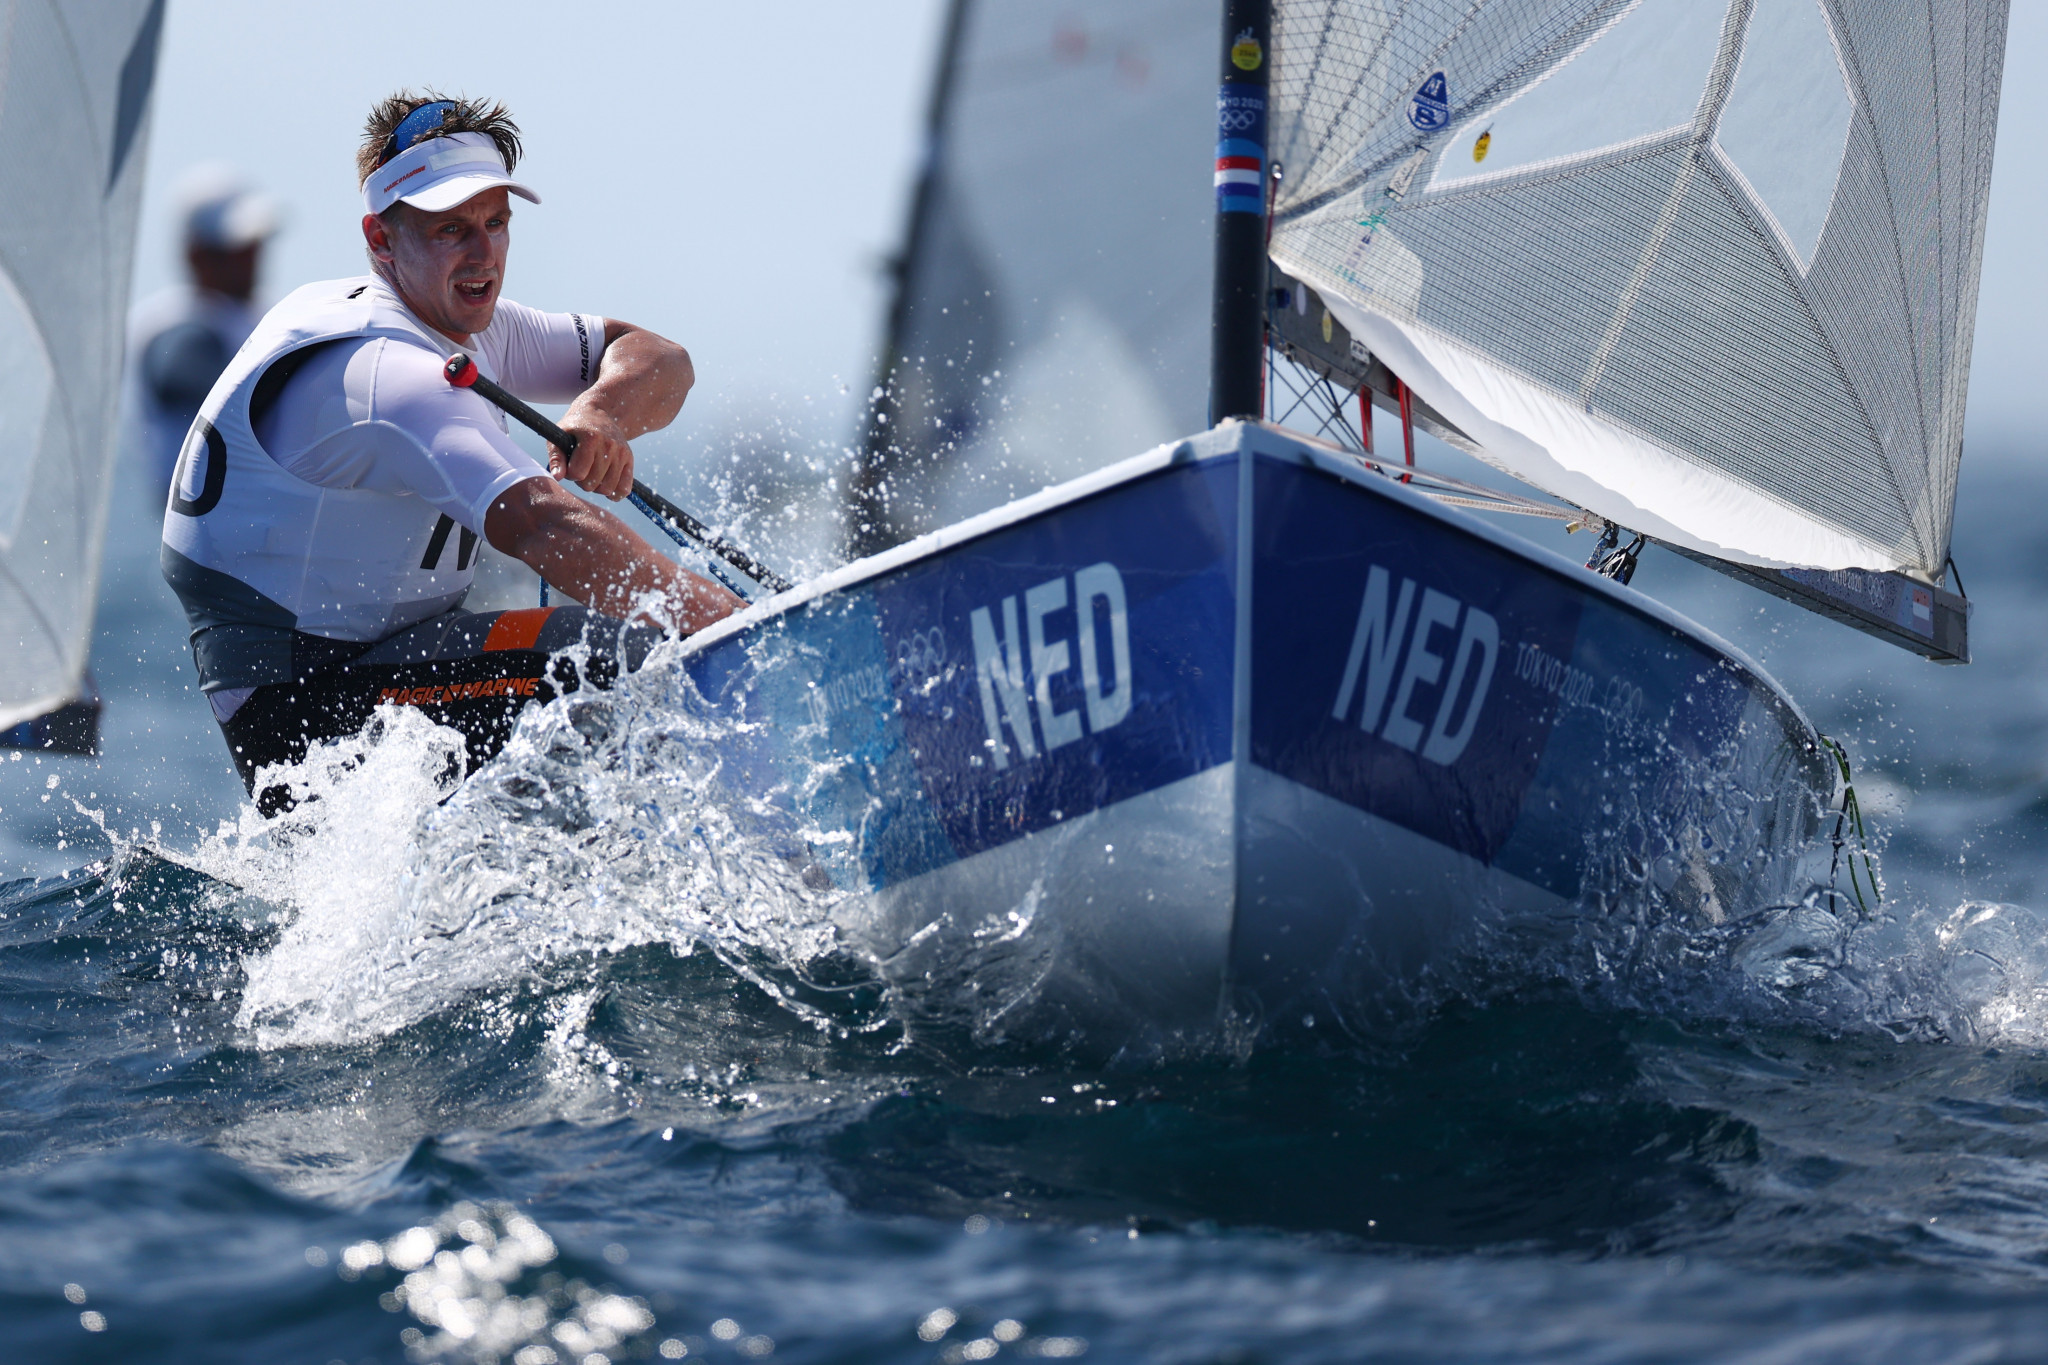 Nicholas Heiner represented The Netherlands in the men's finn class at Tokyo 2020, finishing fourth, but the discipline has been cut from the Olympic Games ©Getty Images